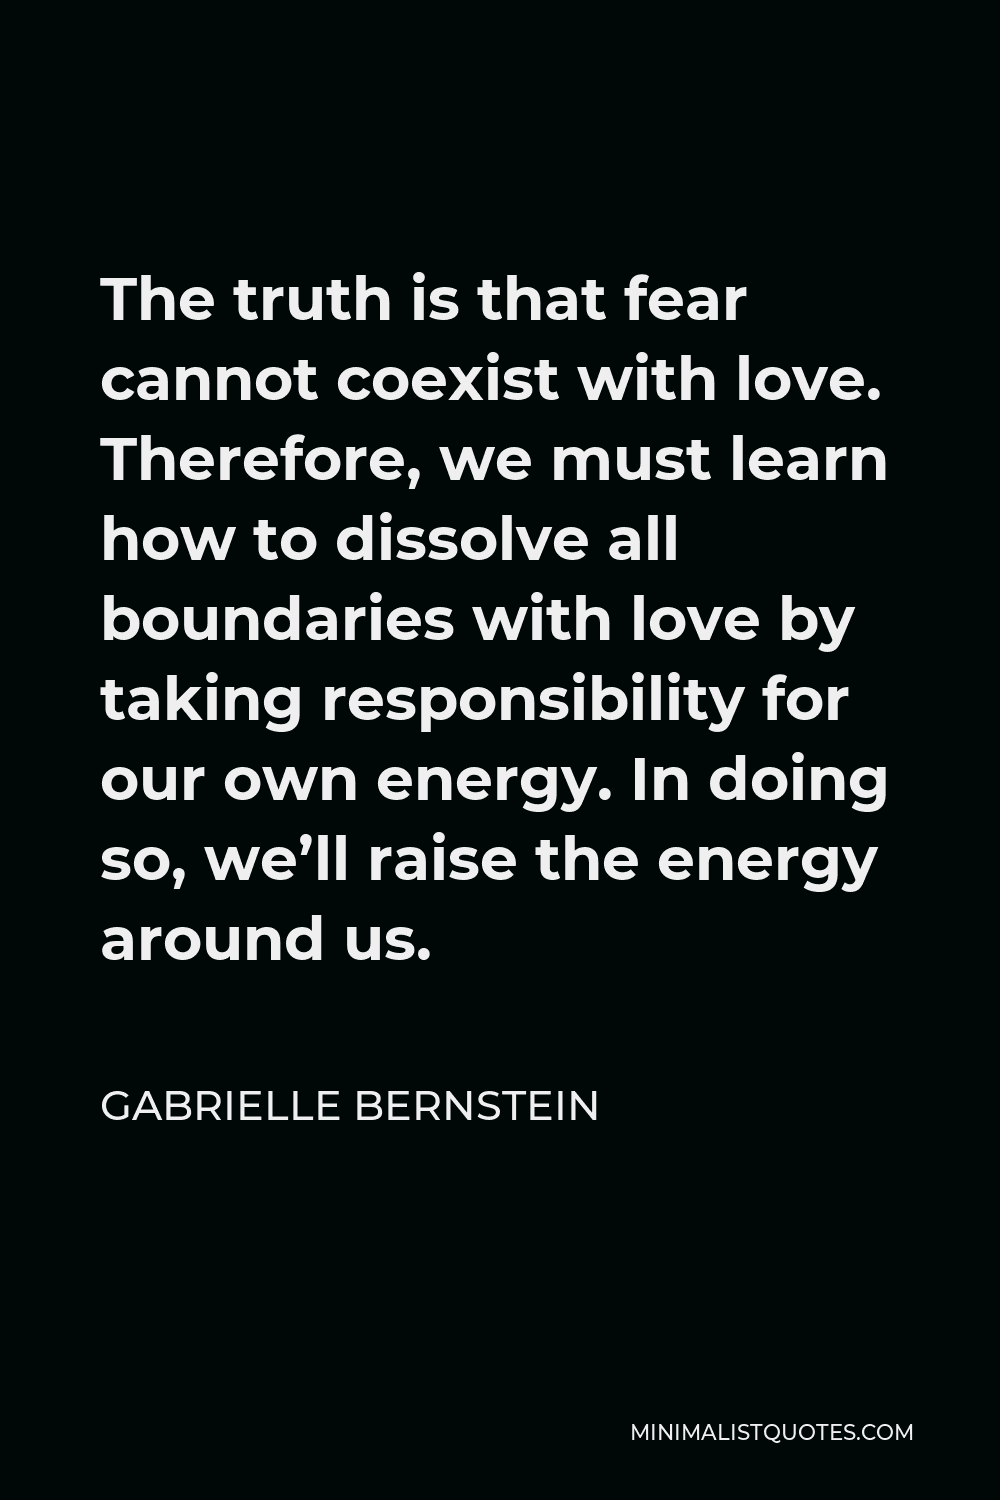 Gabrielle Bernstein Quote - The truth is that fear cannot coexist with love. Therefore, we must learn how to dissolve all boundaries with love by taking responsibility for our own energy. In doing so, we’ll raise the energy around us.